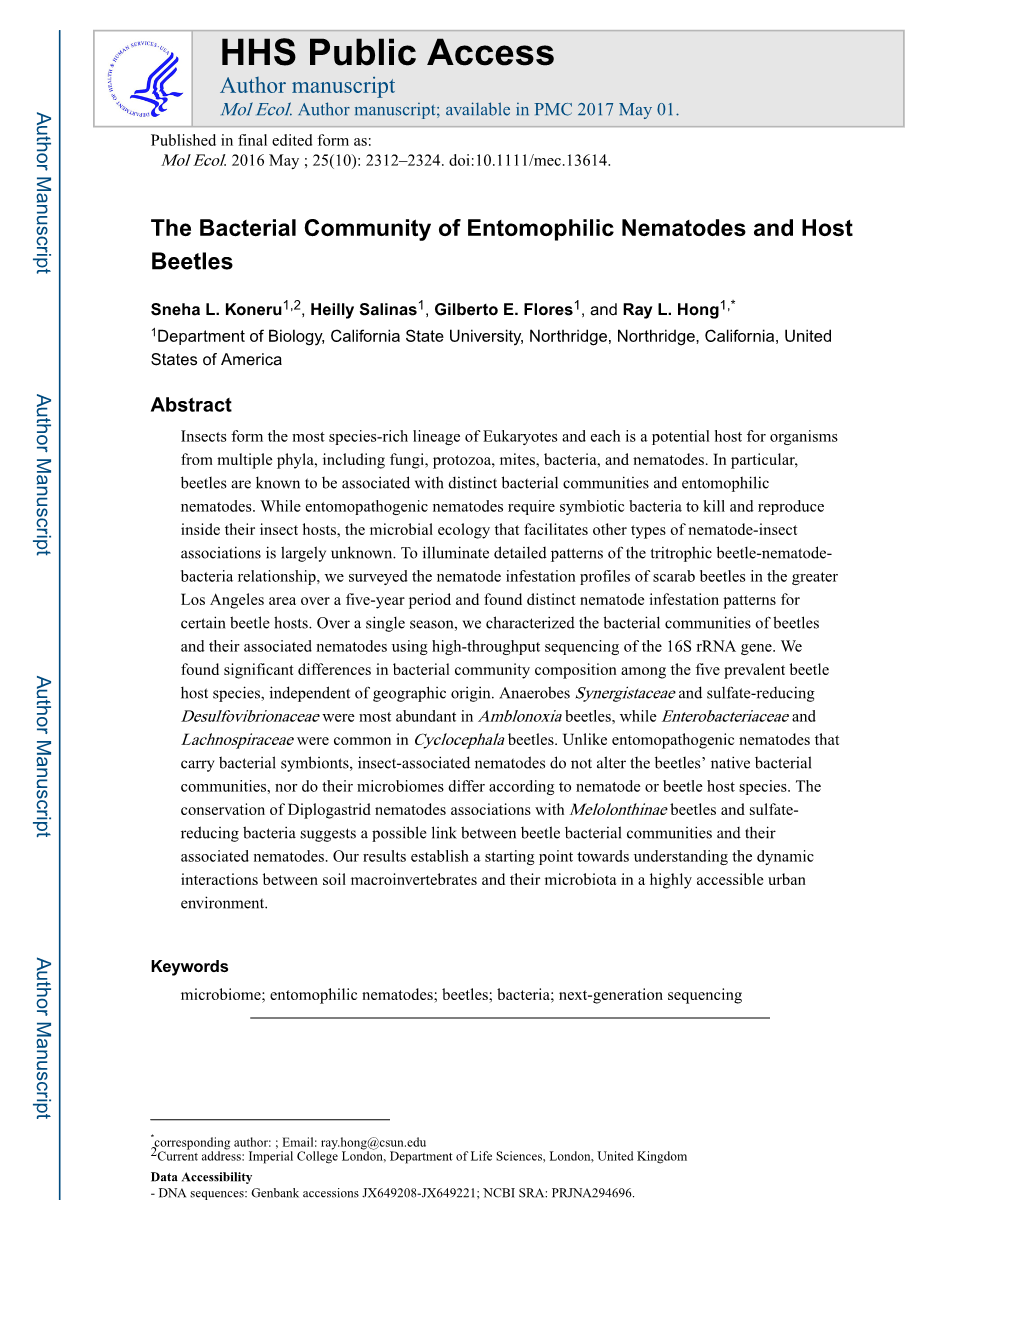 The Bacterial Community of Entomophilic Nematodes and Host Beetles